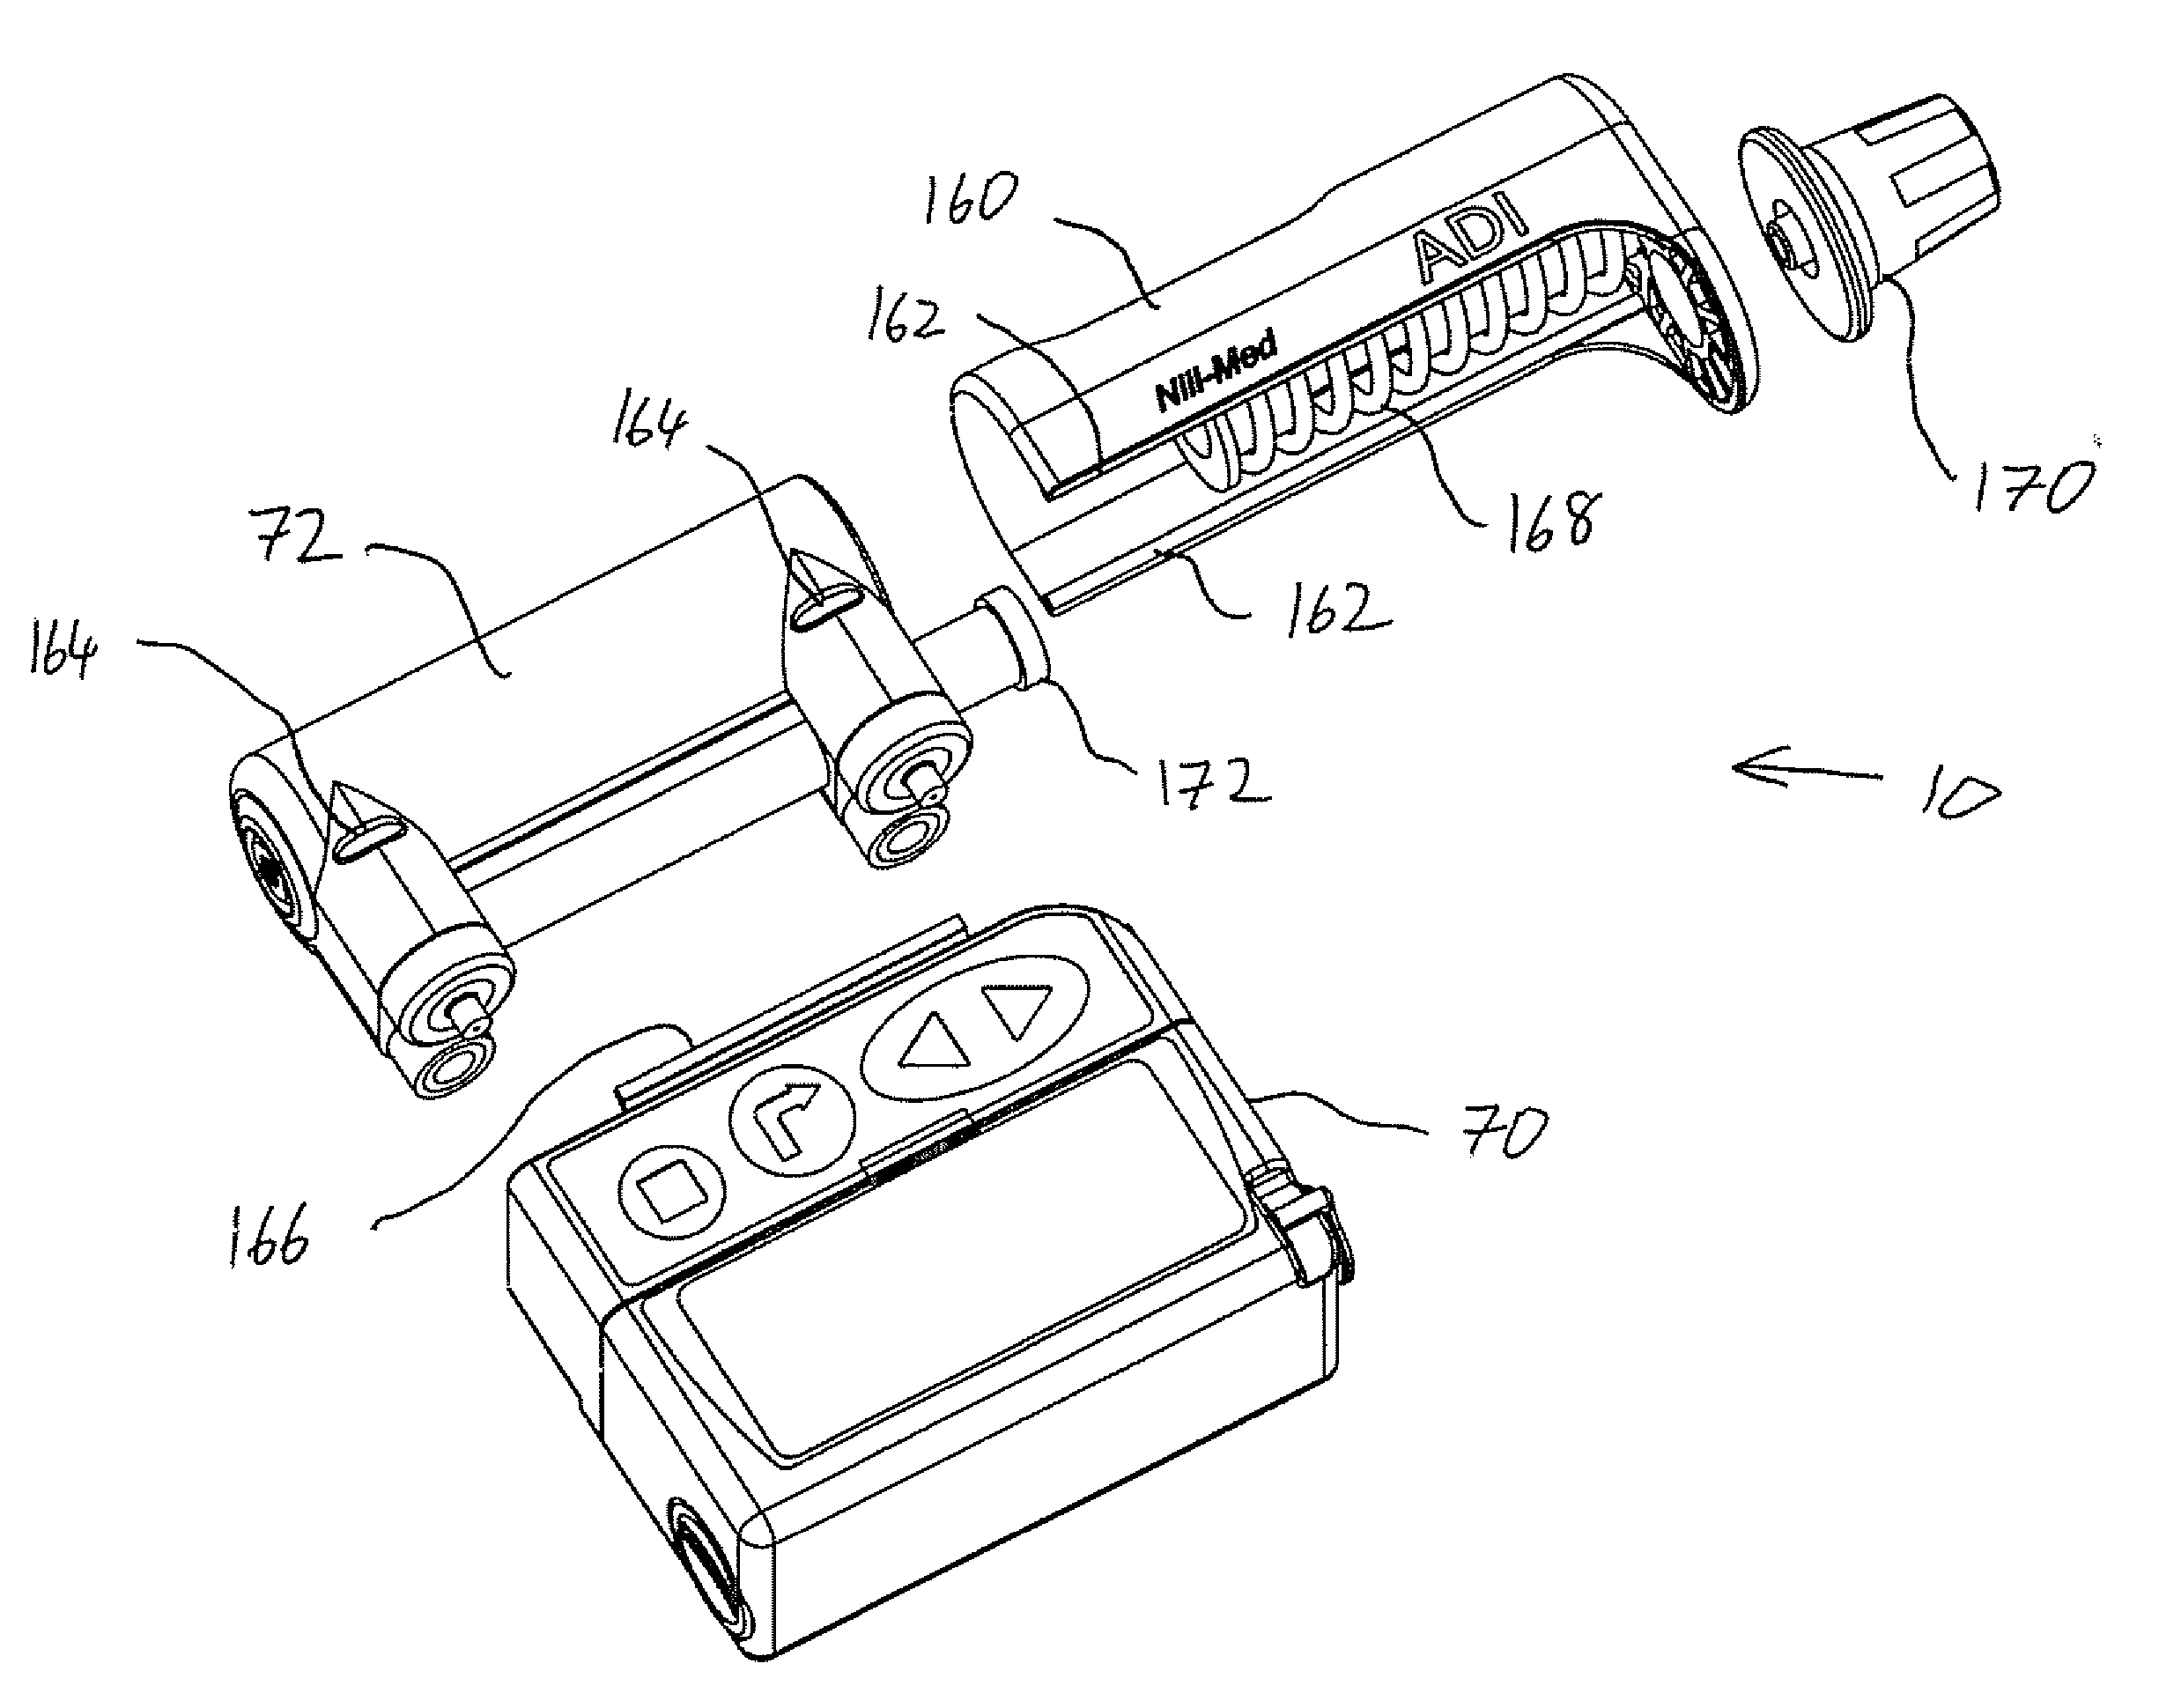 Drug delivery device and method